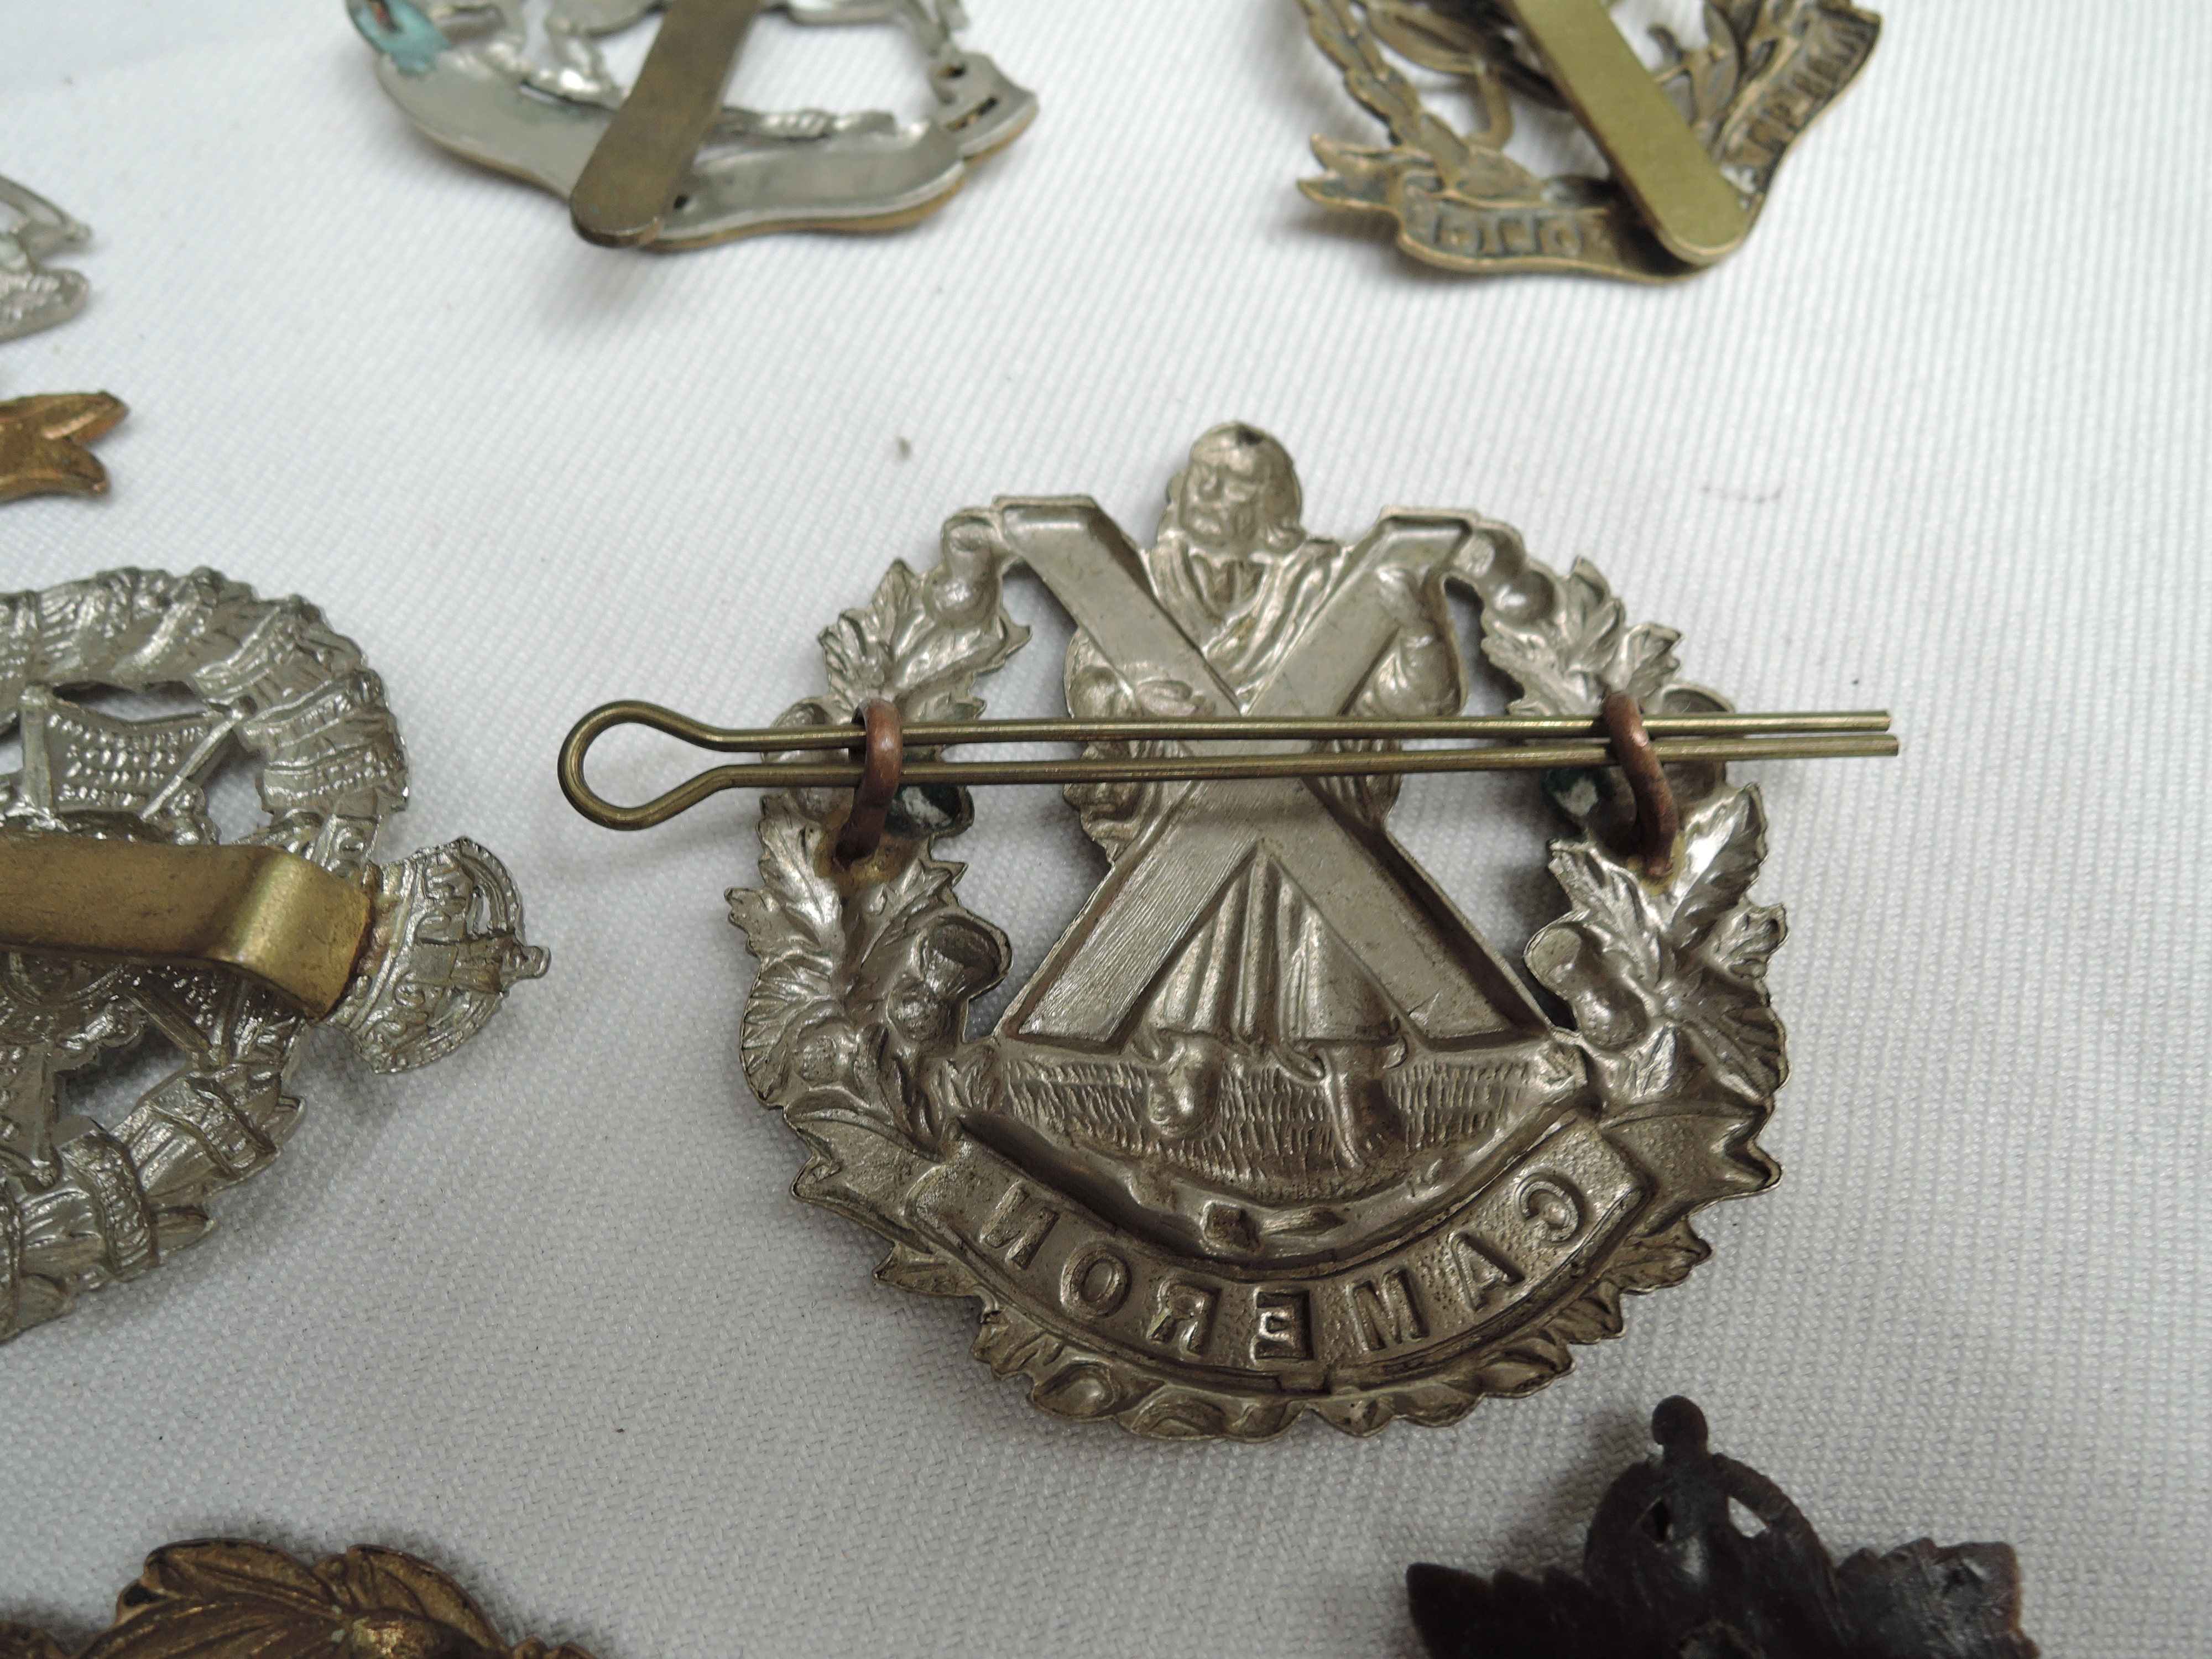 A collection of Army/Military Cap Badges along with a small collection of Coins - Image 4 of 7